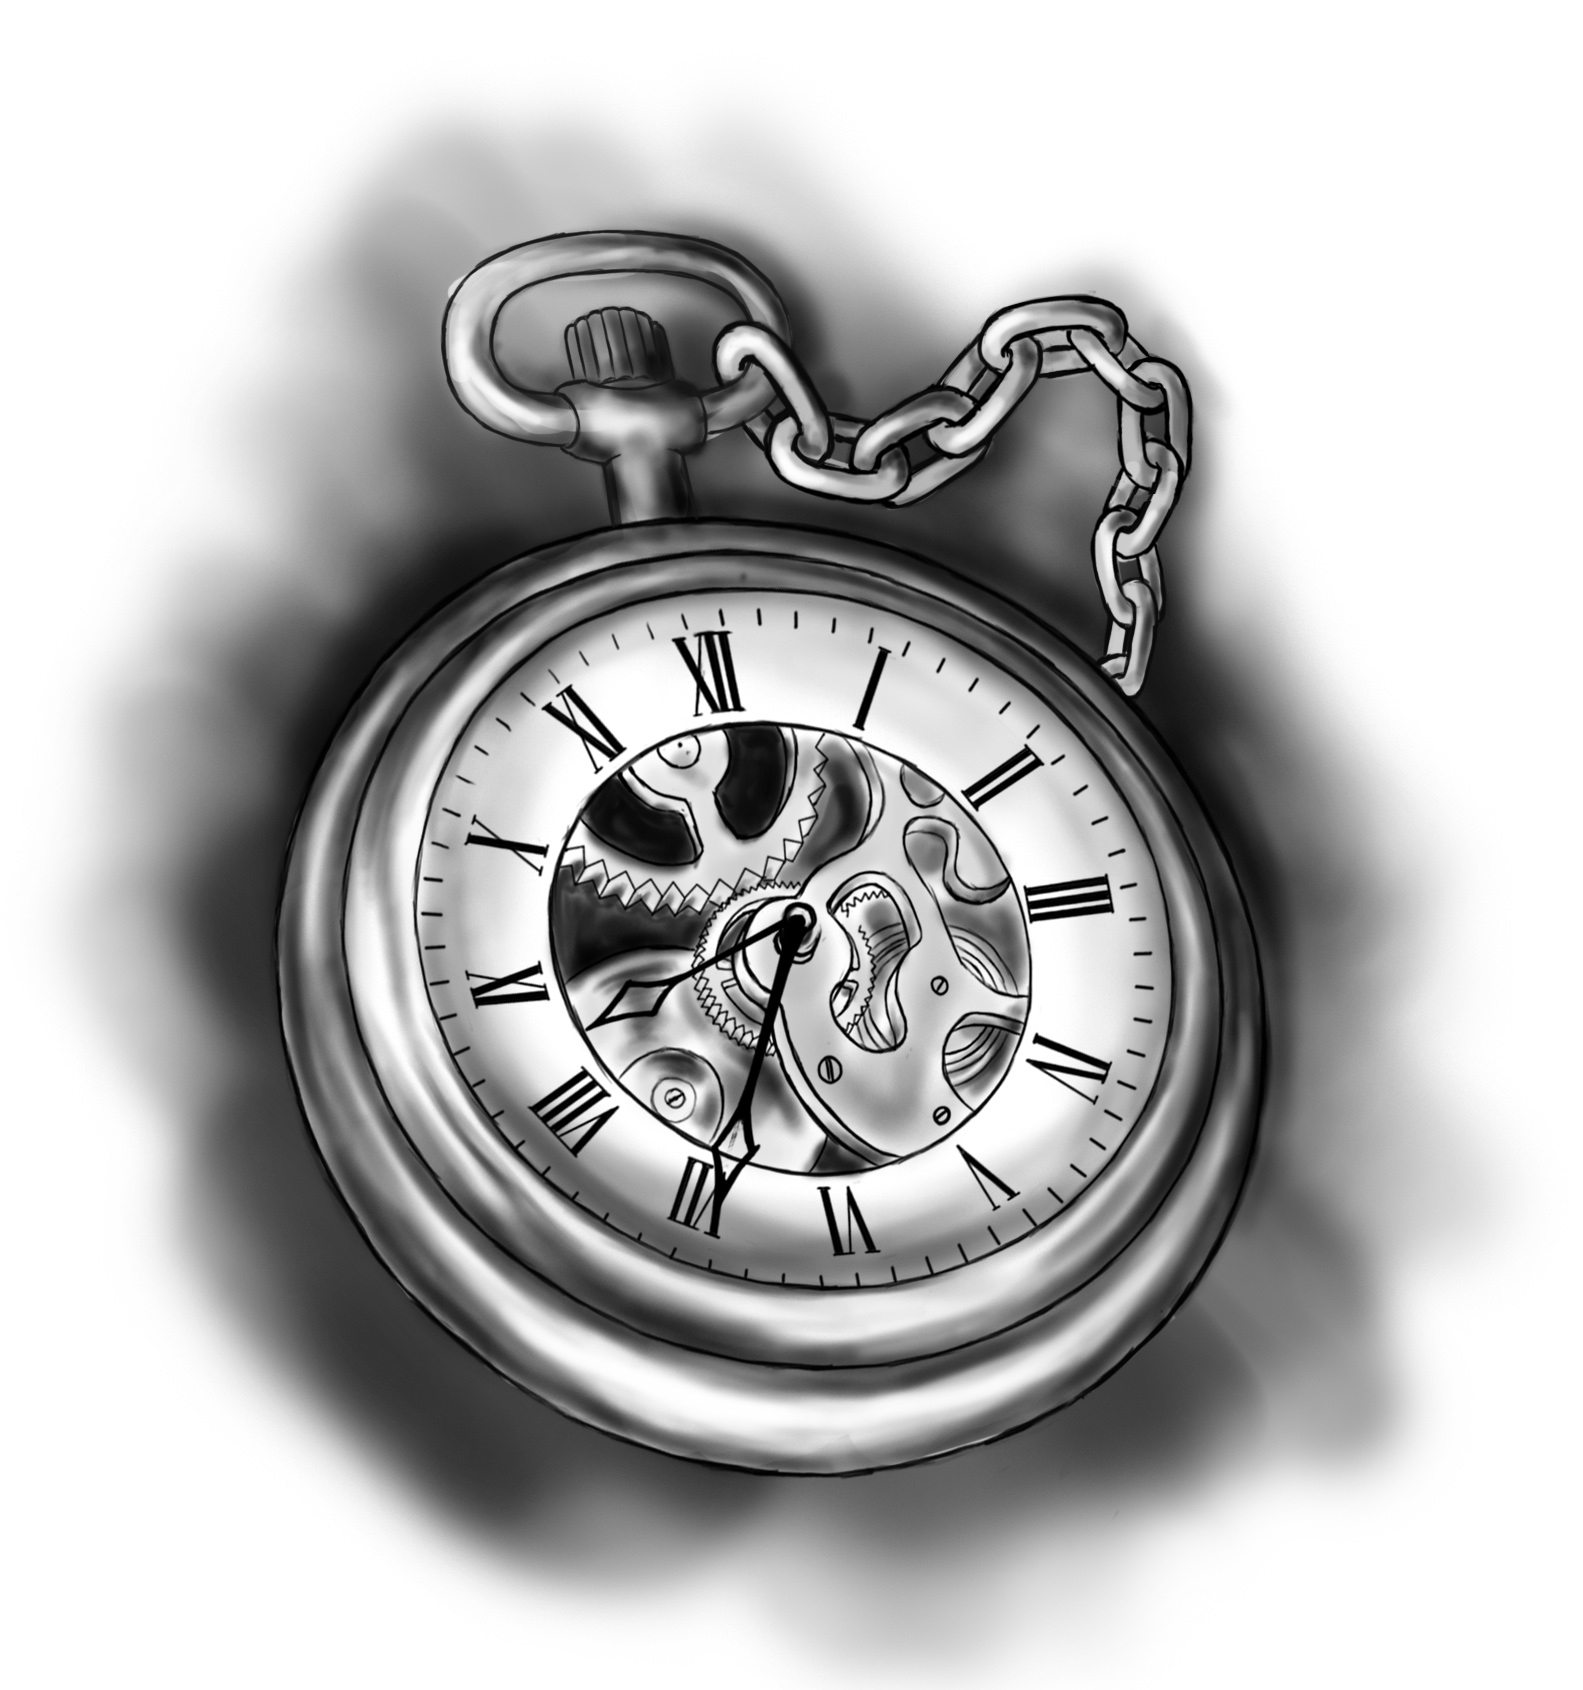 Drawing Sketch Of A Pocket Watch Drawn Compass Pocket Watch - Pocket Watch...